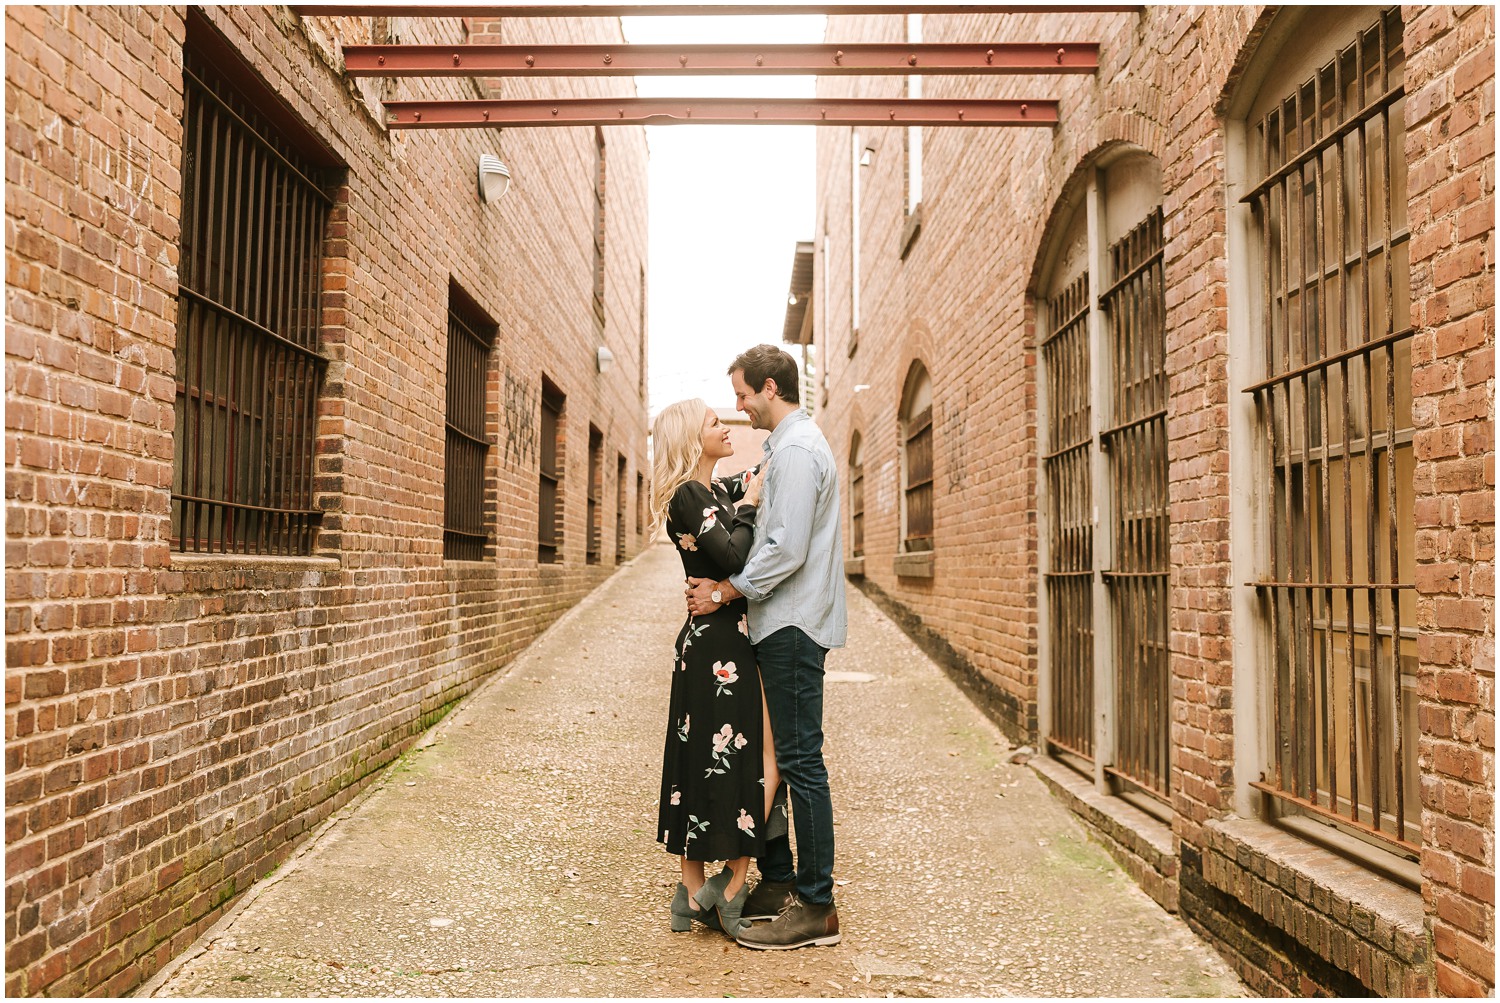 bride and groom stand face to face looking at each other in brick alleyway